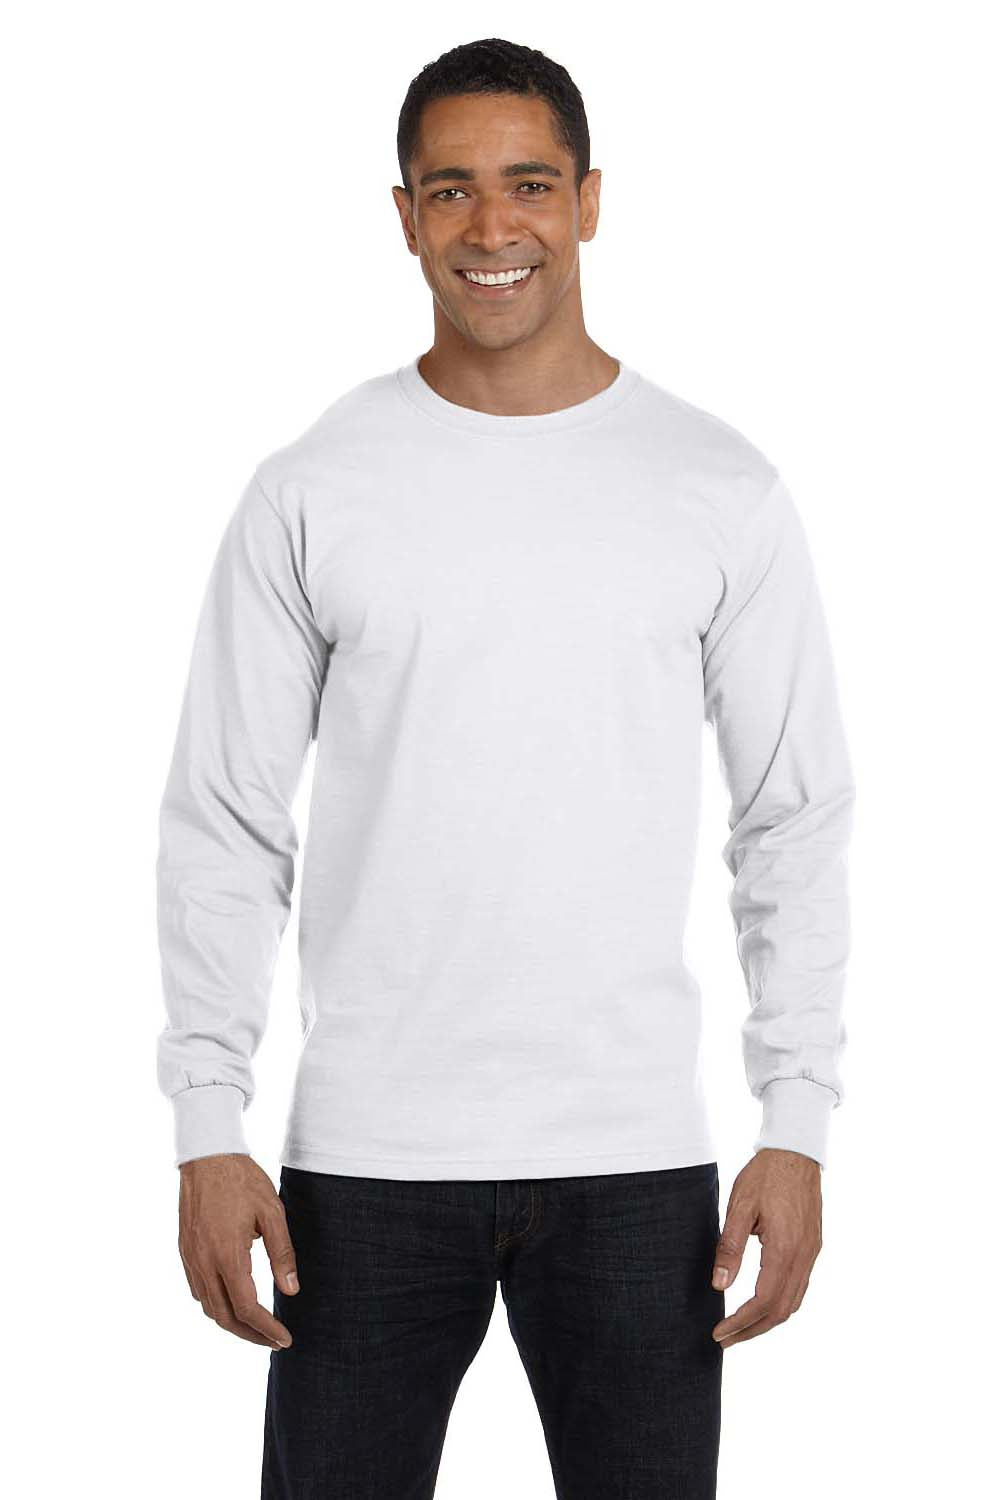 Hanes 5186 Mens Beefy-T Long Sleeve Crewneck T-Shirt White Front